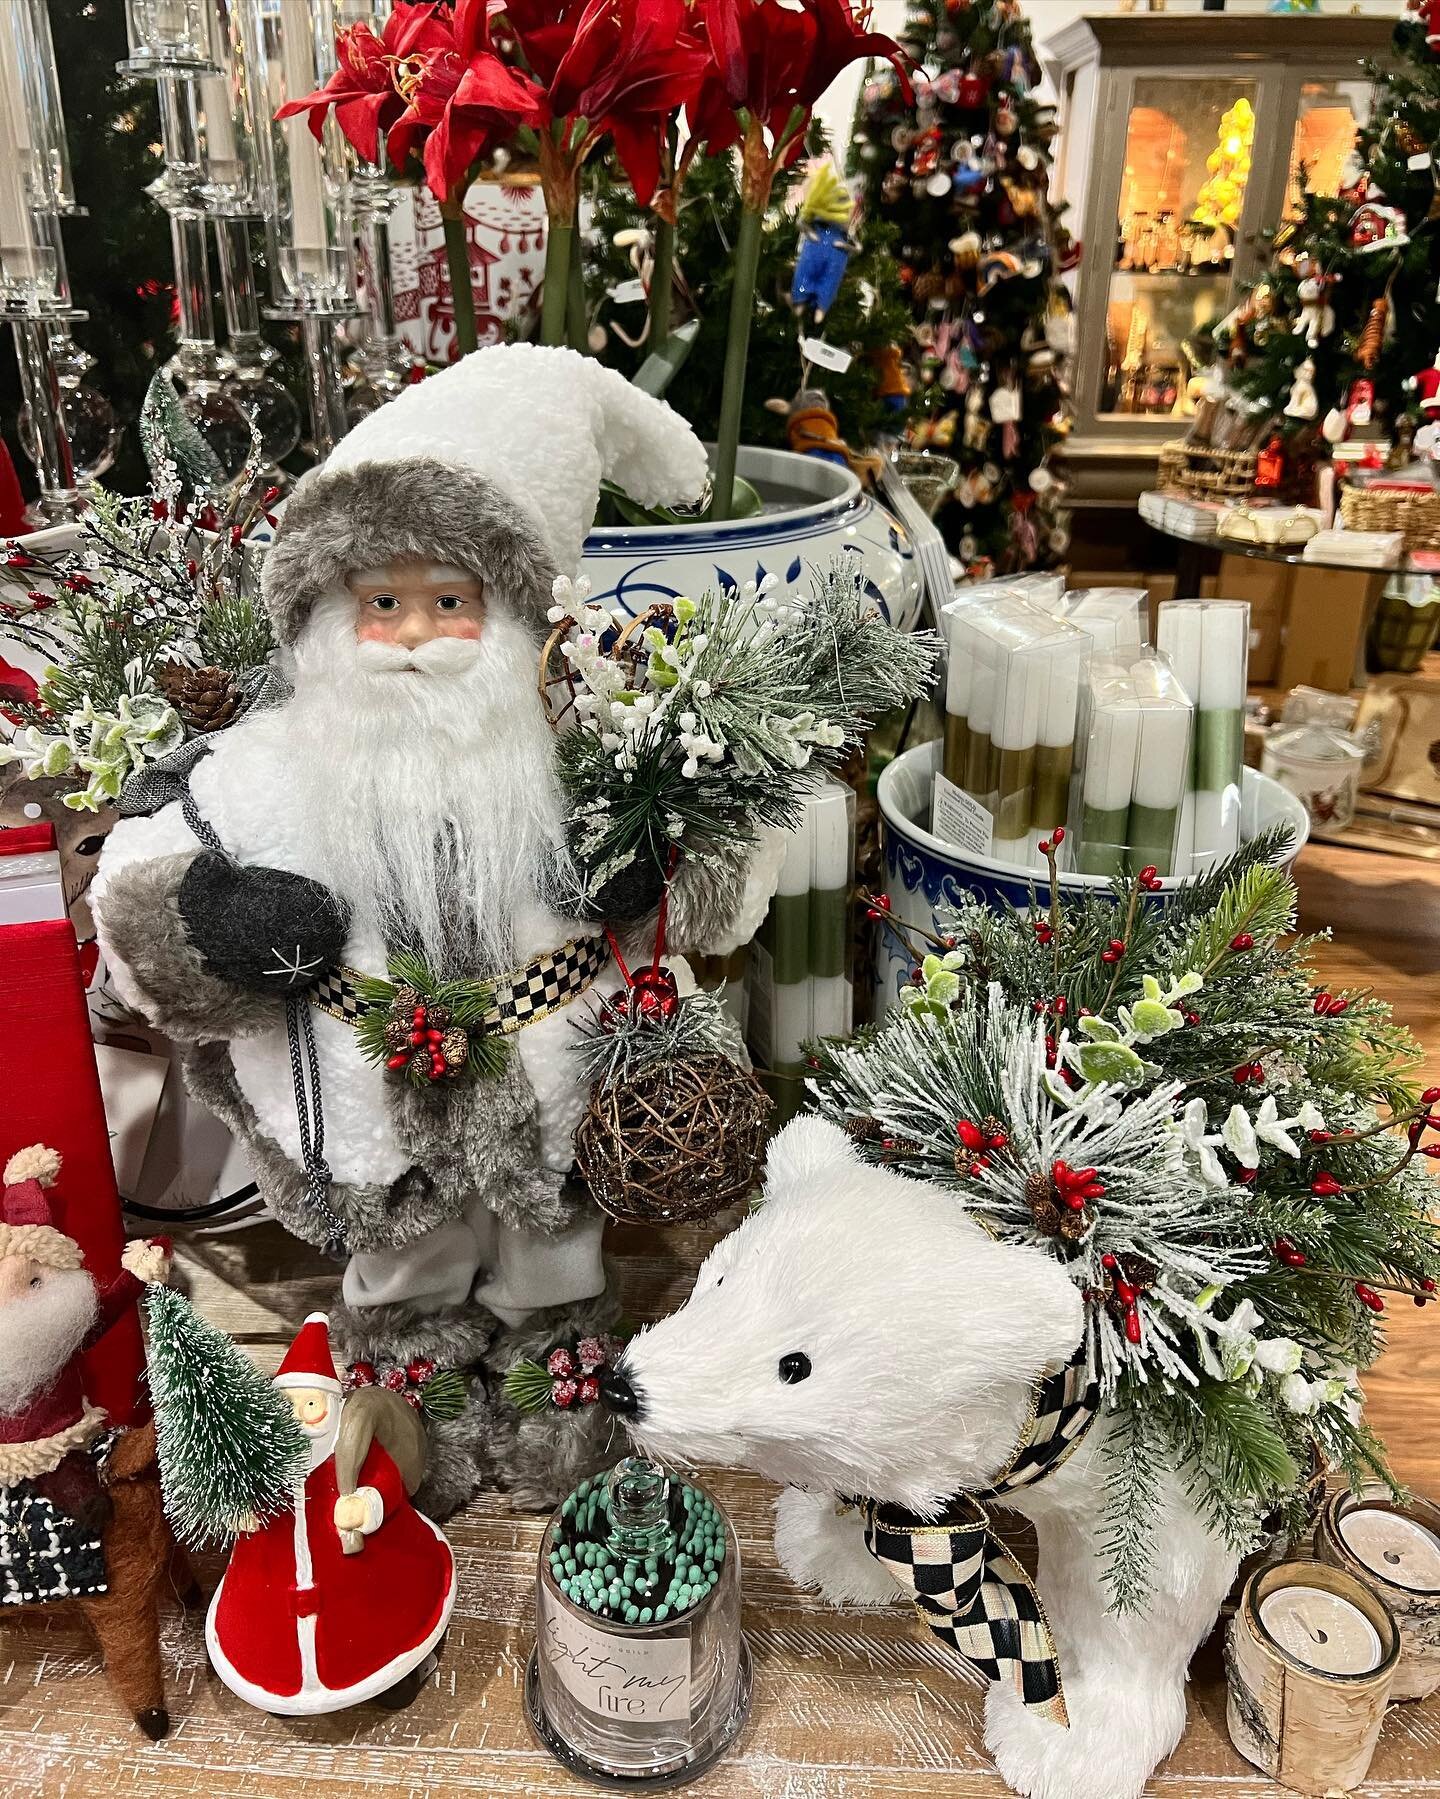 🎄❤️🎄Nothing says the holidays @figleafoh quite like our exclusive Santa&rsquo;s and winter woodland friends. Arriving daily, to escape the chill outside, we have been eagerly and warmly welcoming our newest pals. As every year @figleafoh, these are